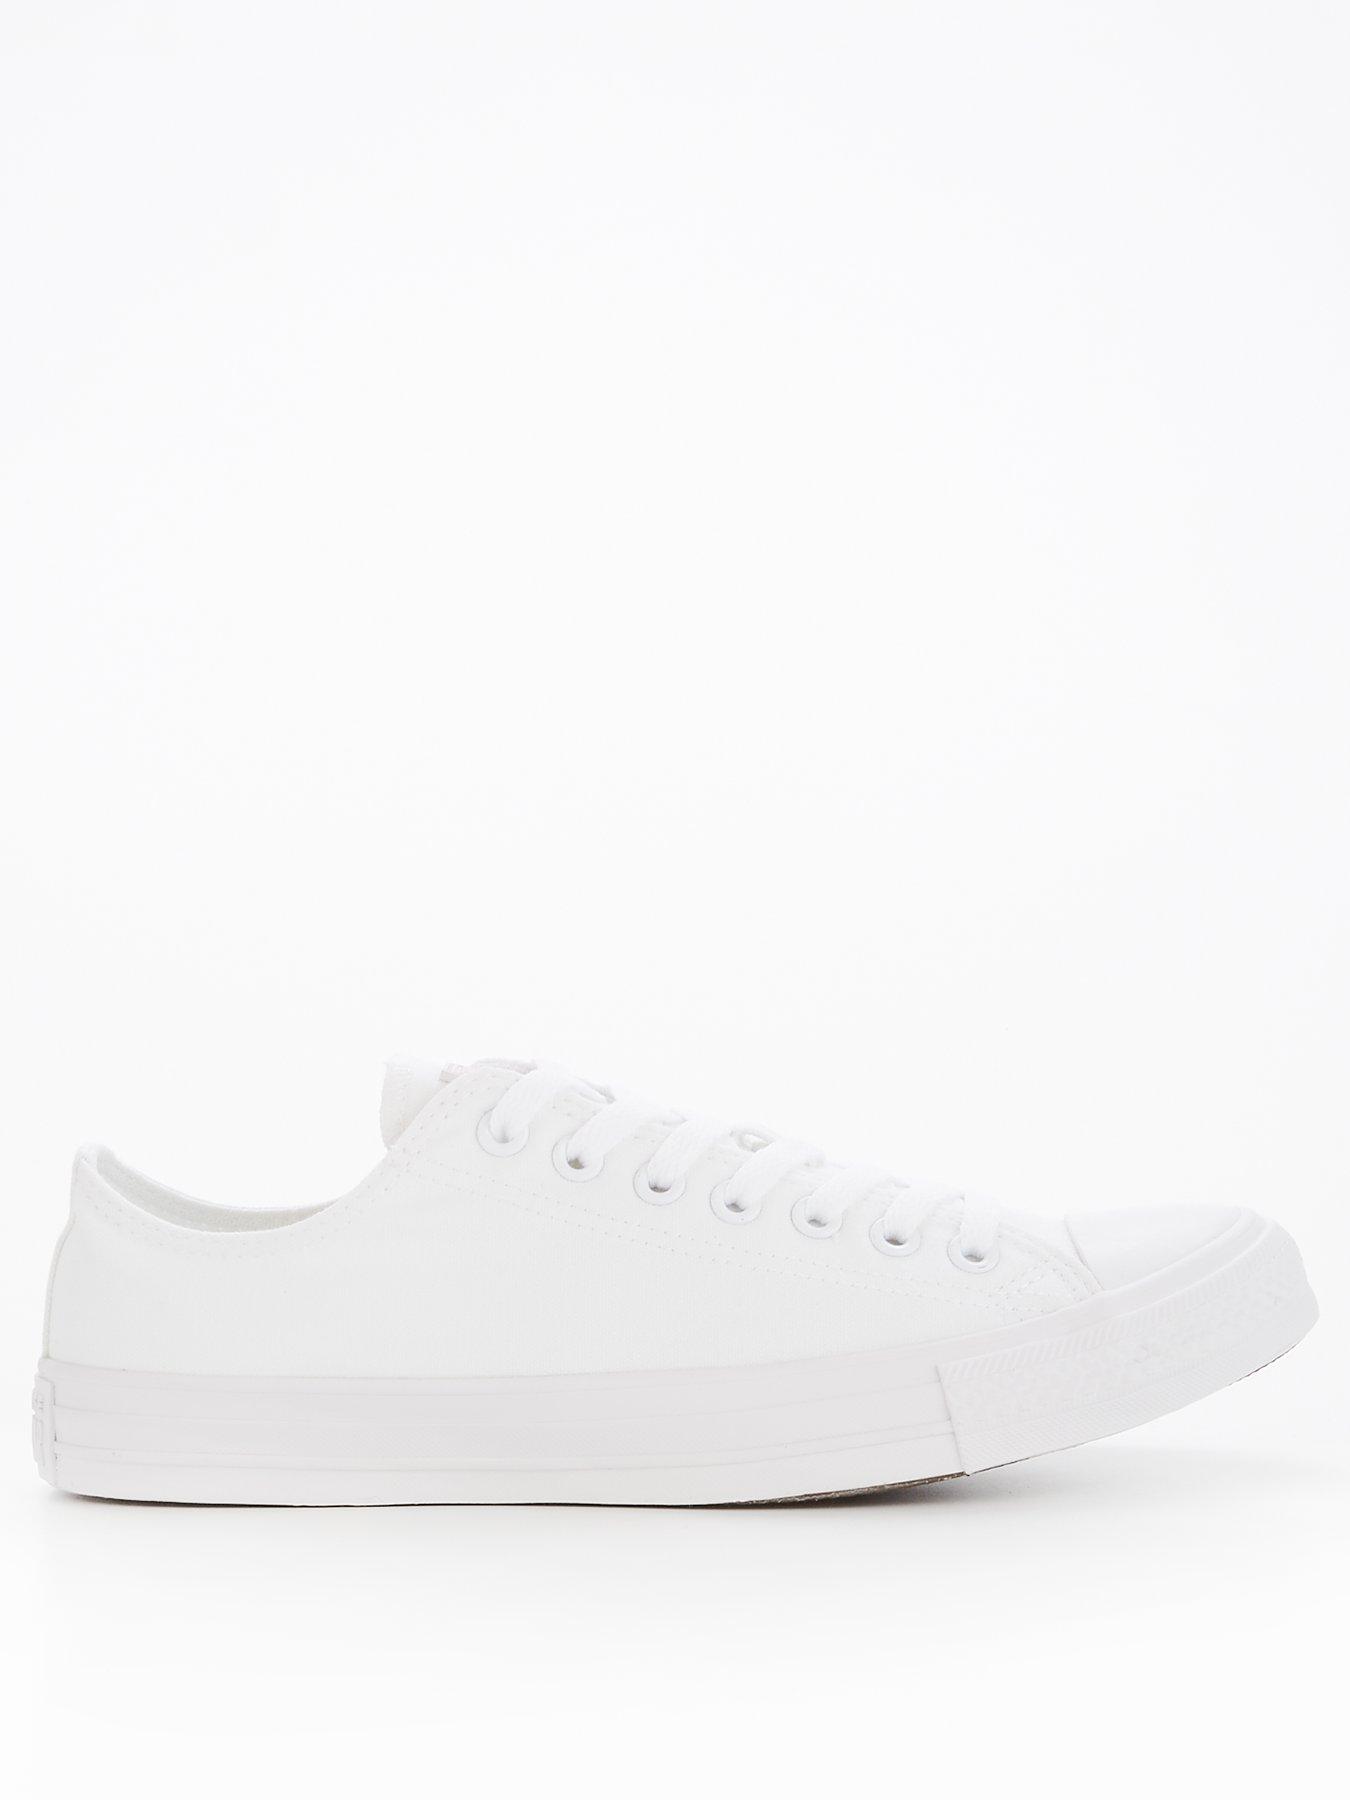 Converse Chuck Taylor All Star Ox - White | very.co.uk